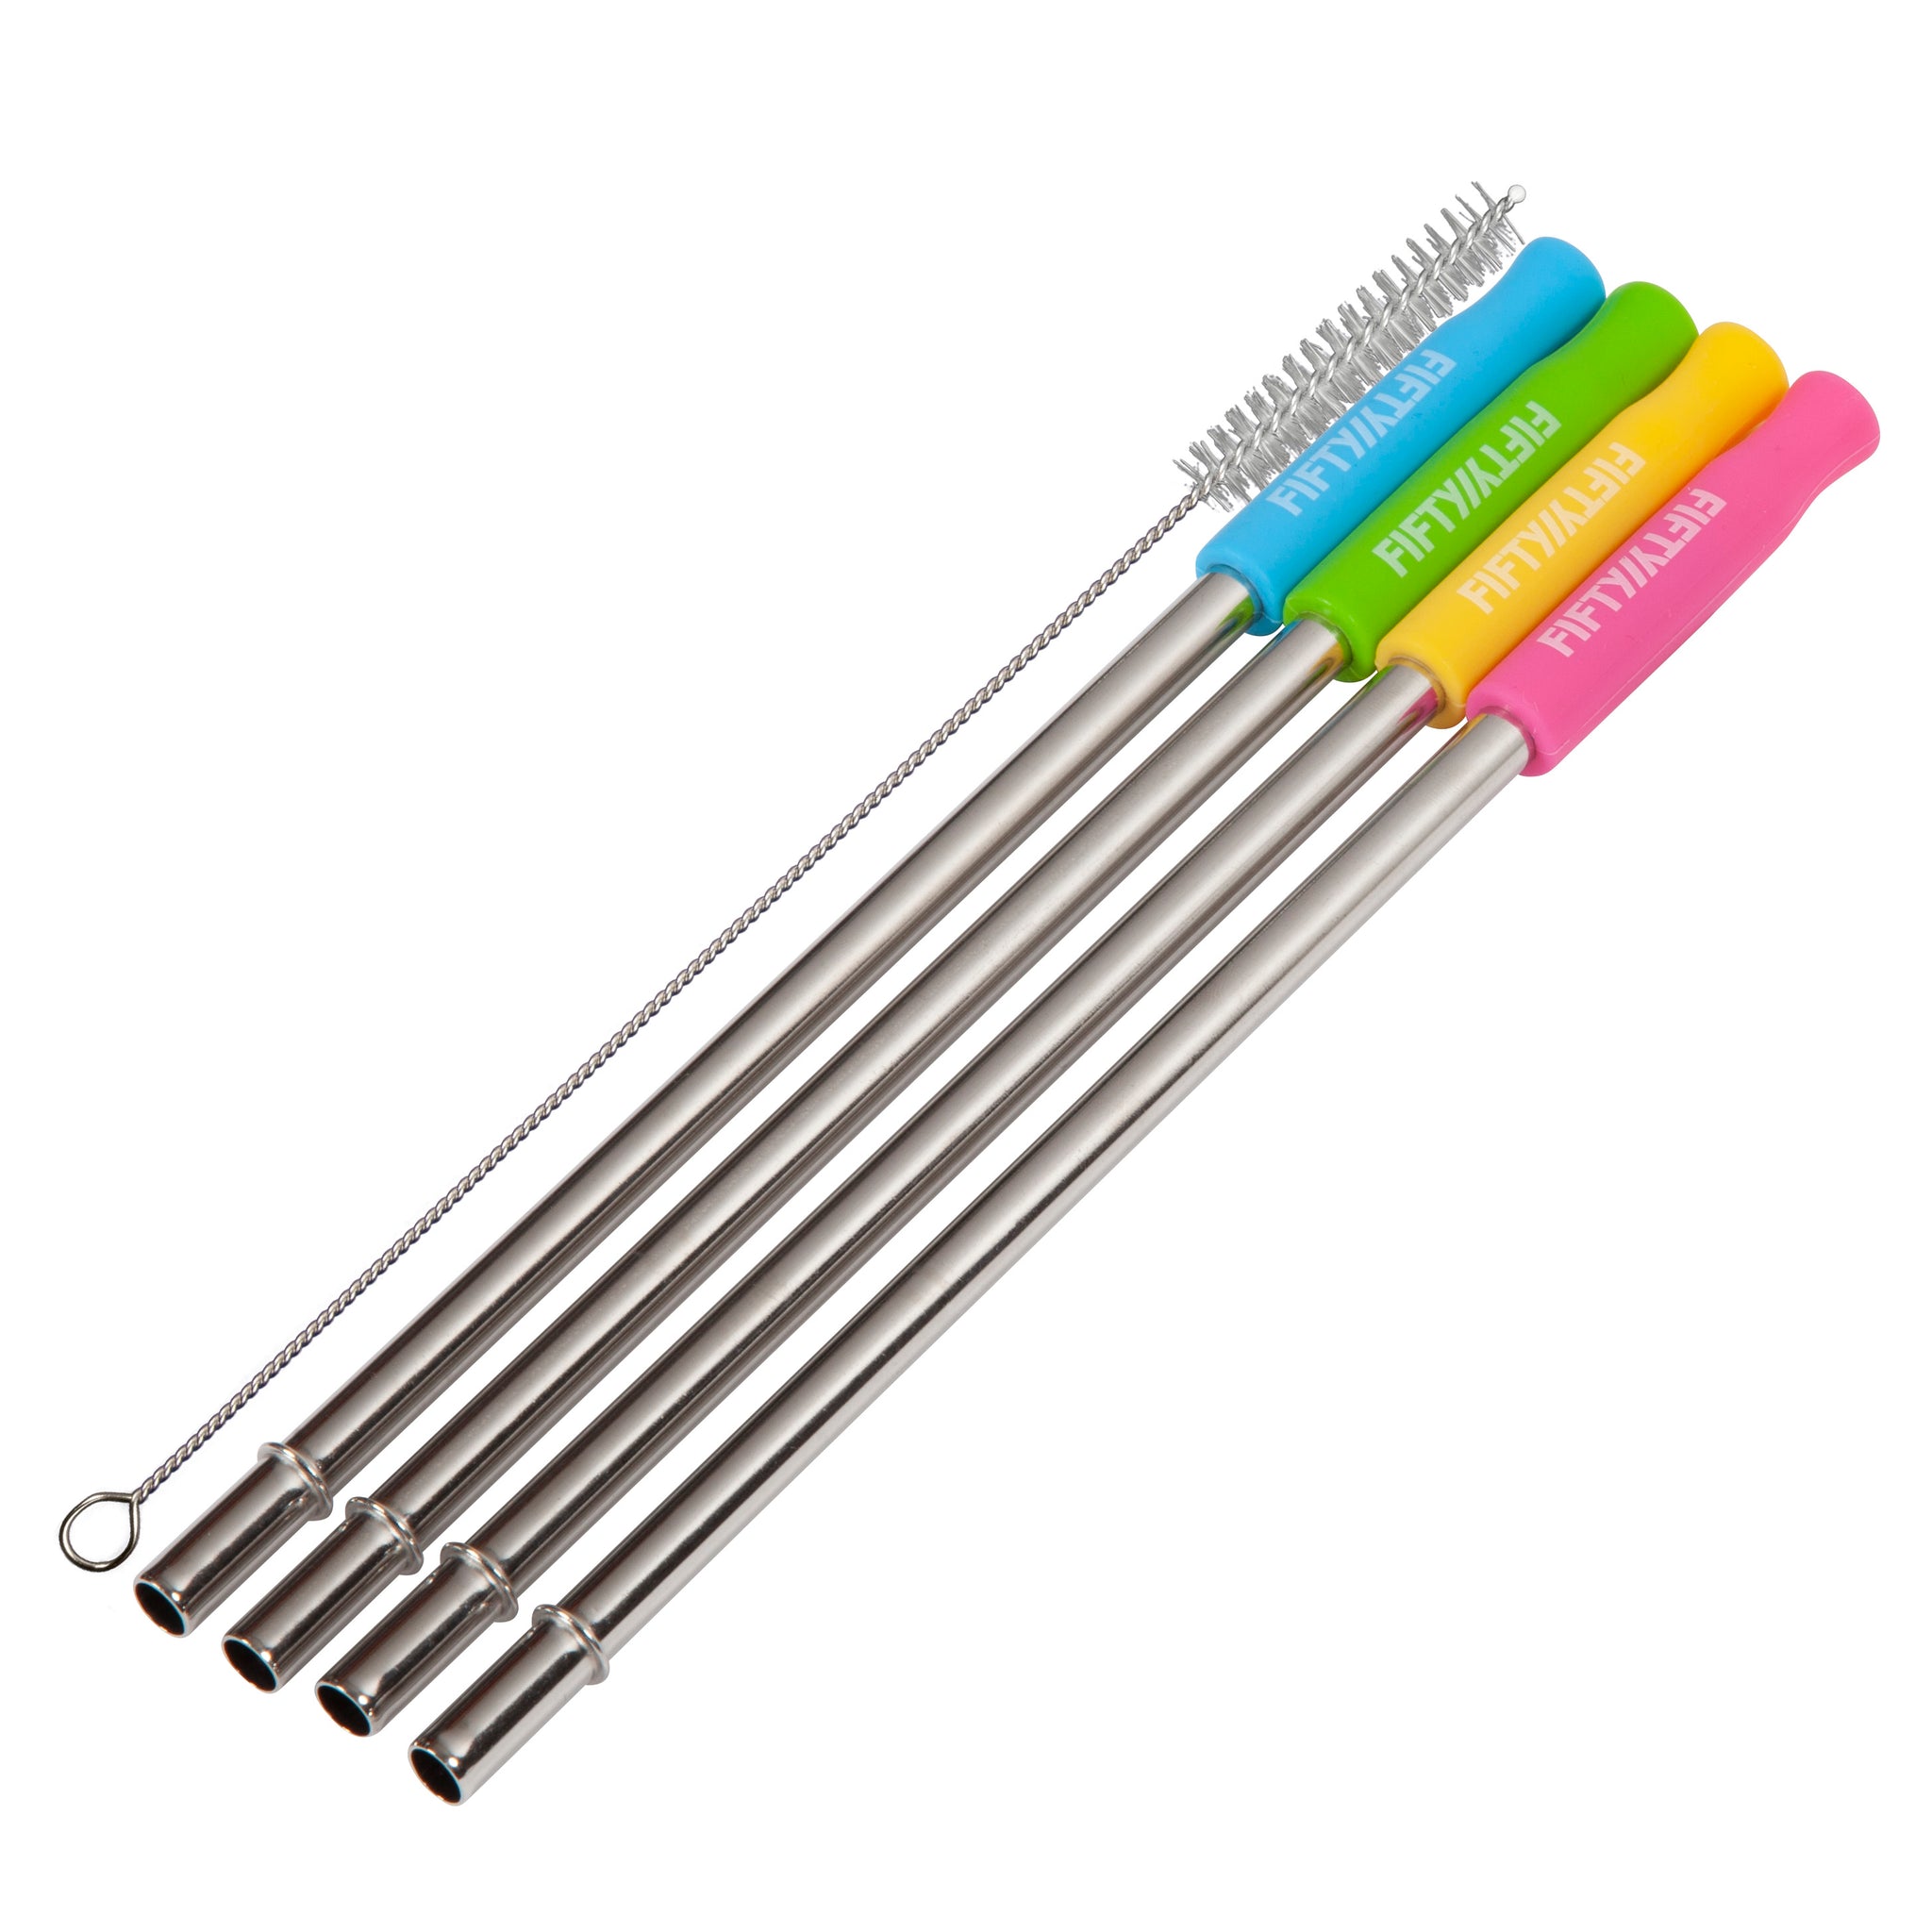 Stainless Steel Straws w/ Silicone Tip - 4pk Assorted Colors with